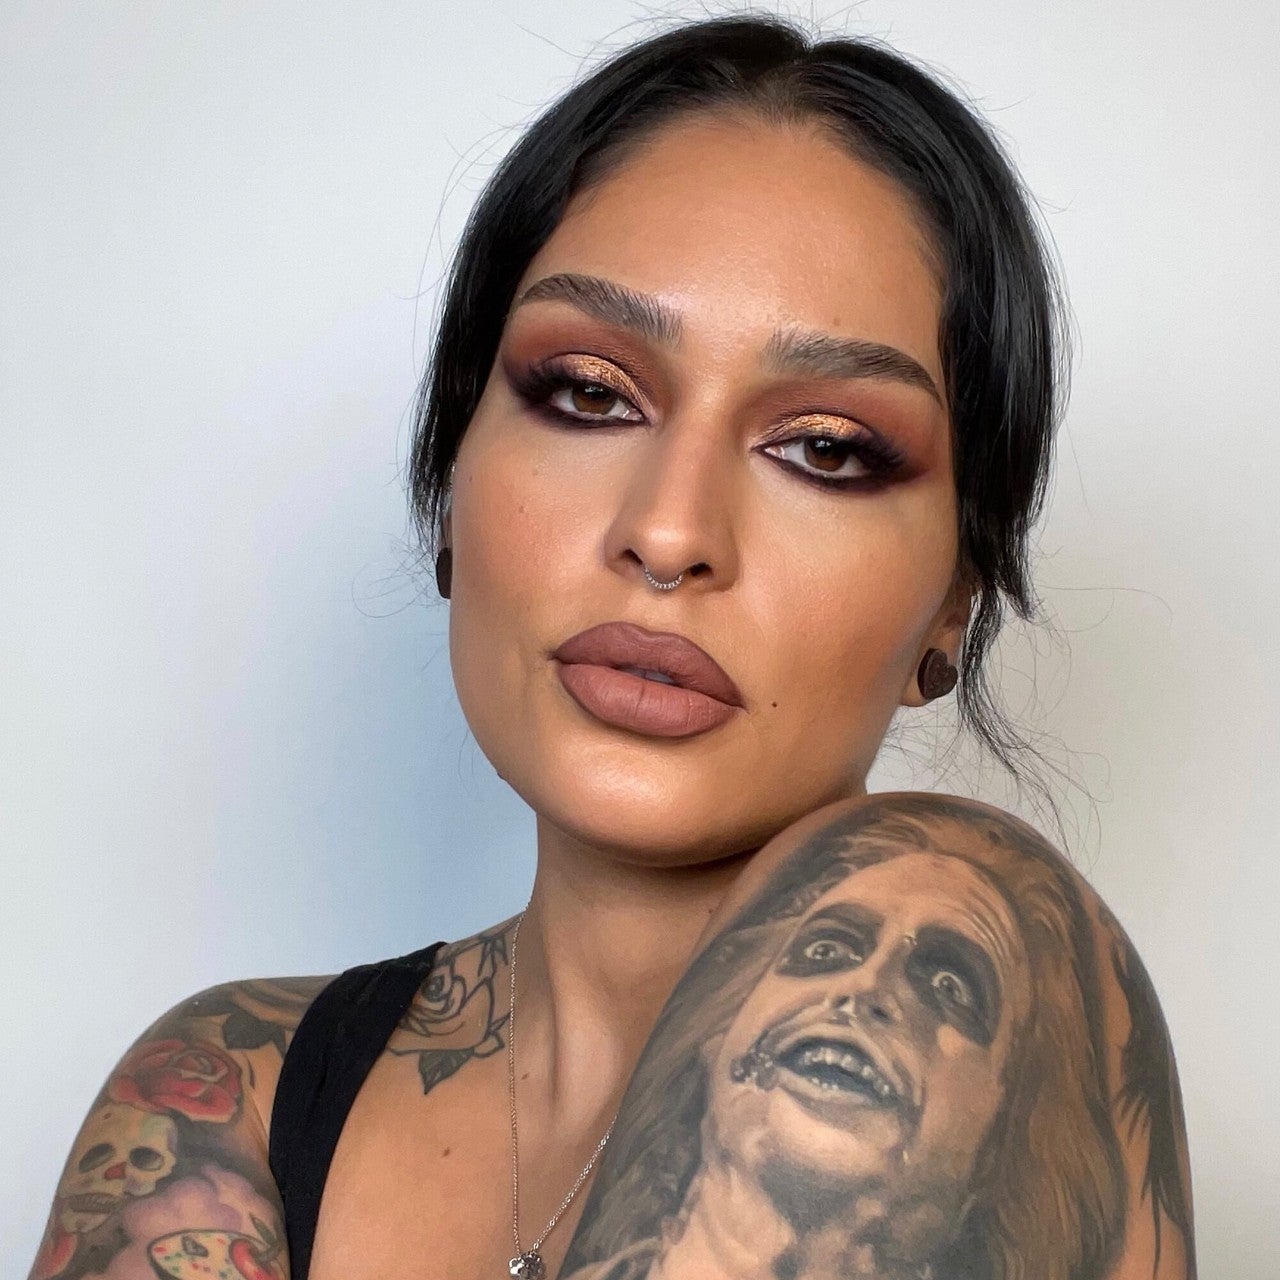 This photo of a face tattoo being covered up shows how Kat Von D's makeup  can pretty much cover anything